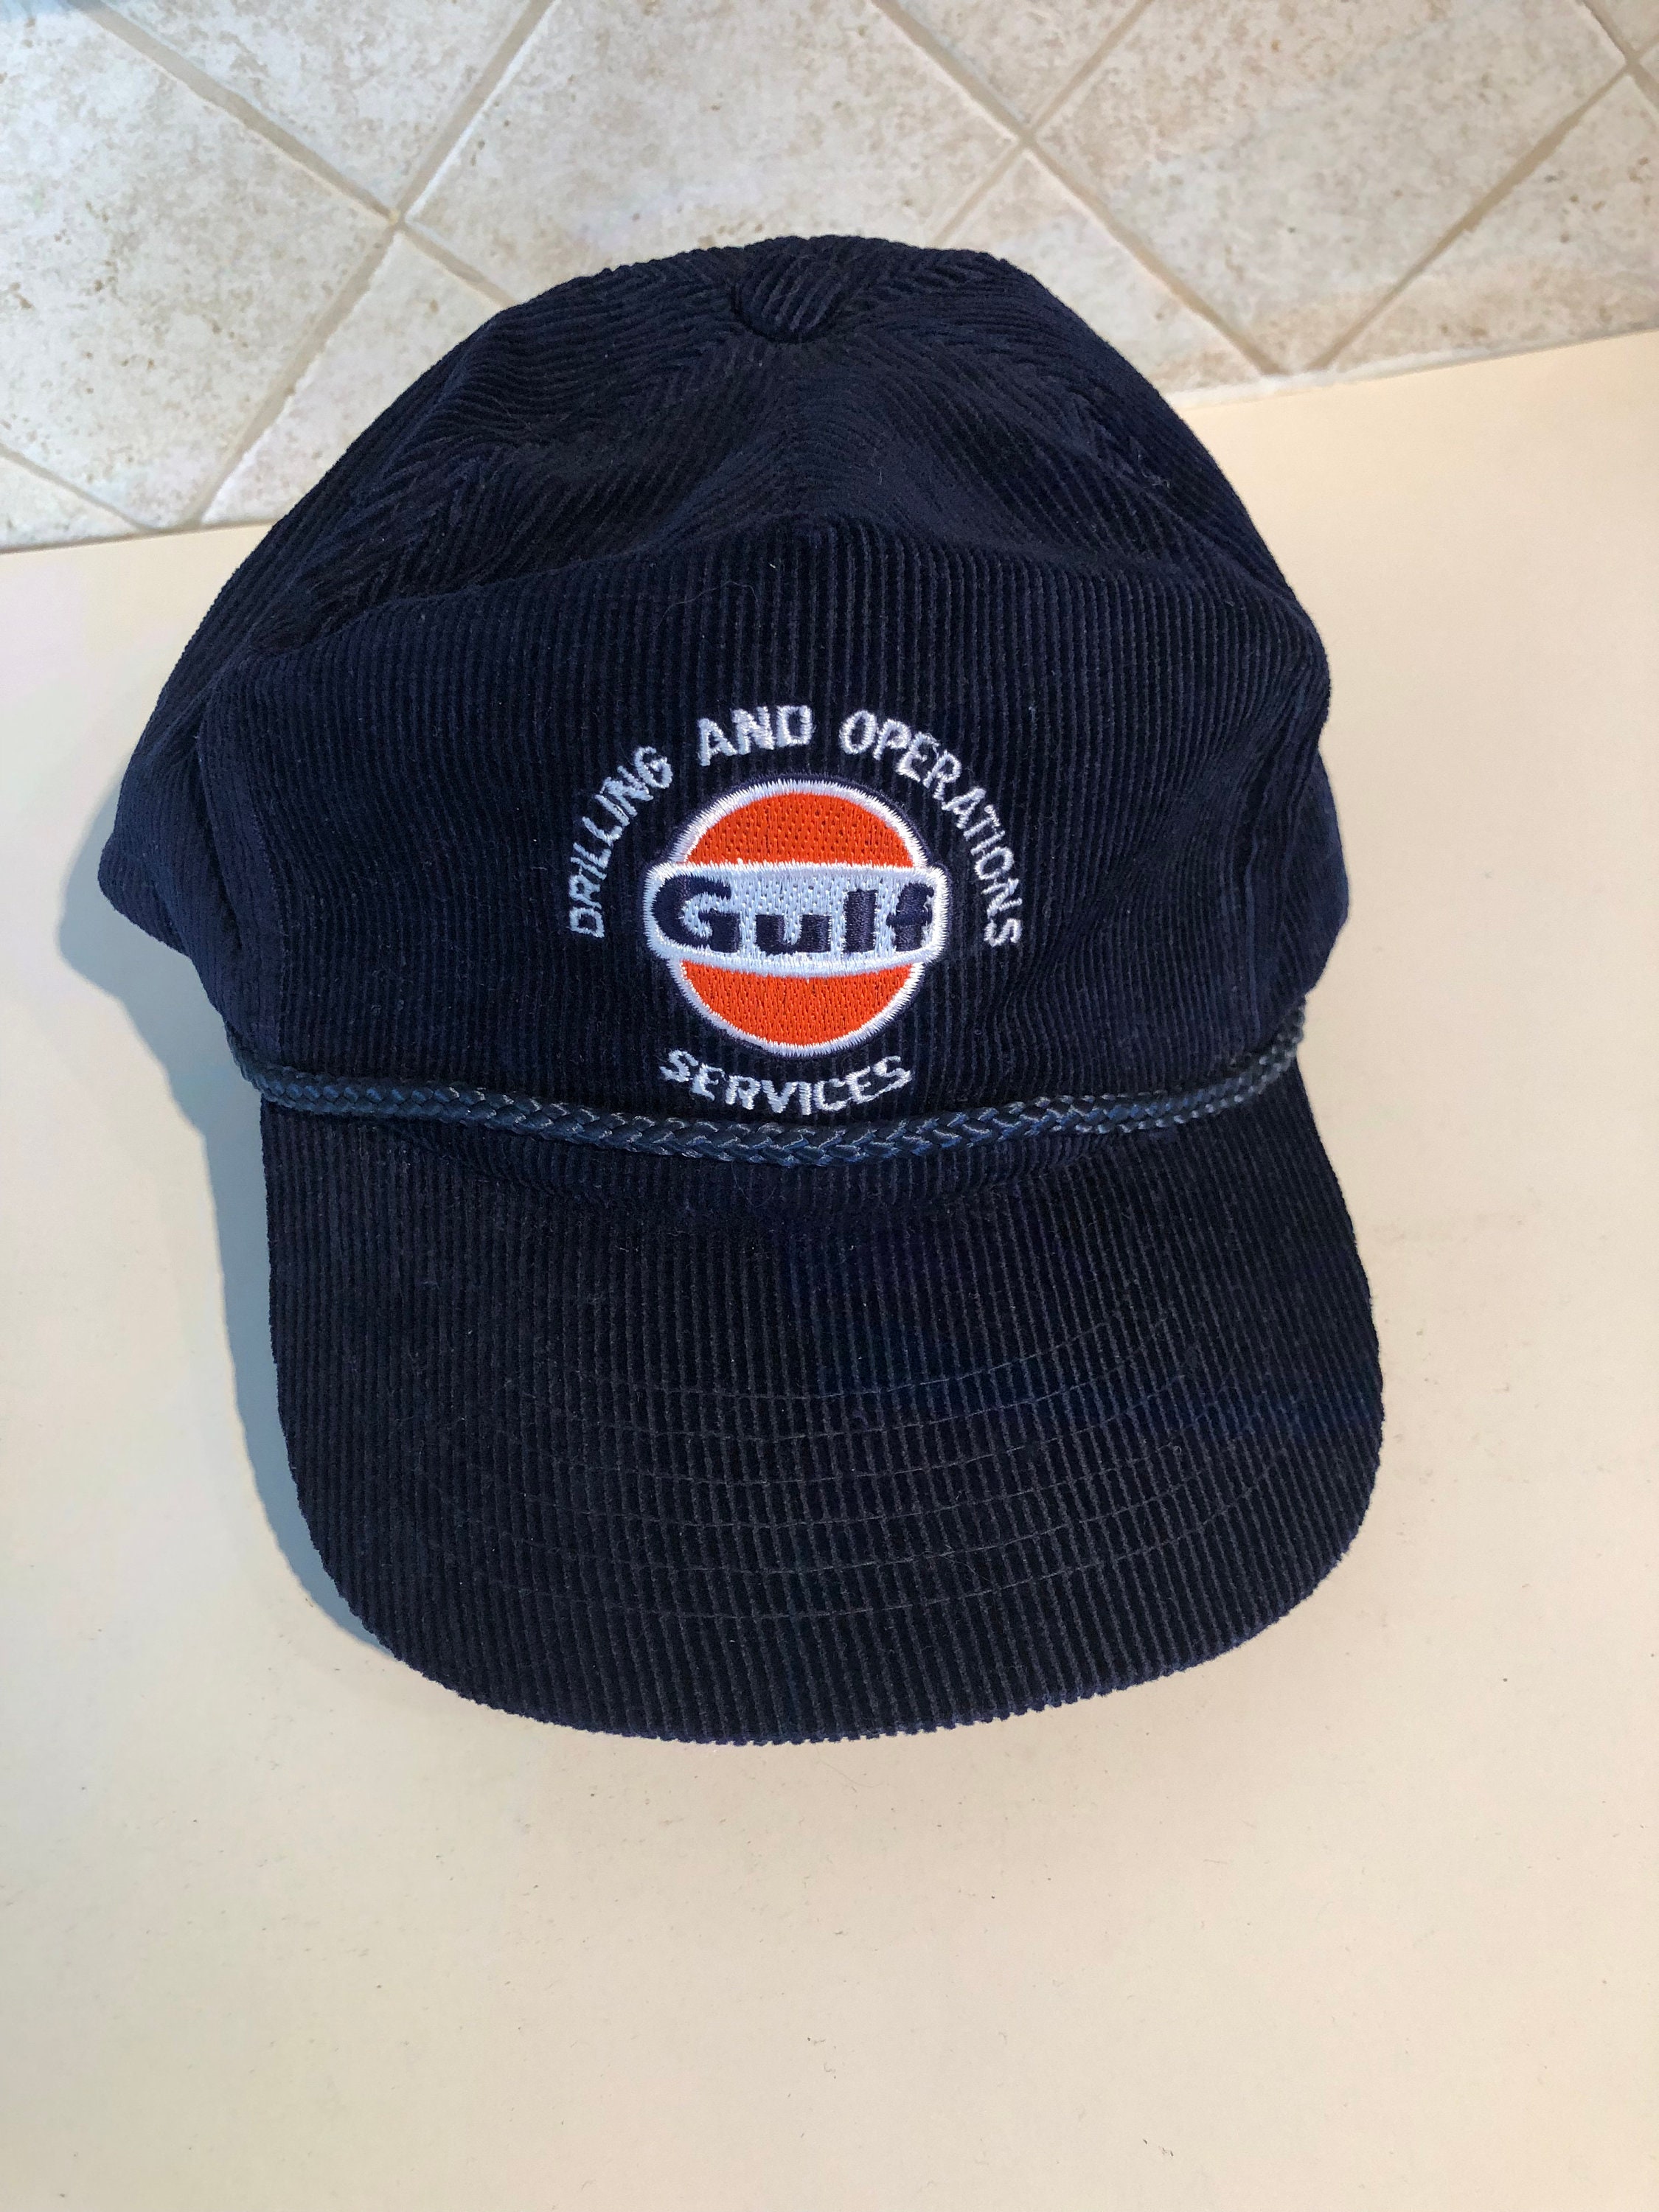 Gulf Drilling and Operations Services Blue Corduroy Baseball Hat - Etsy